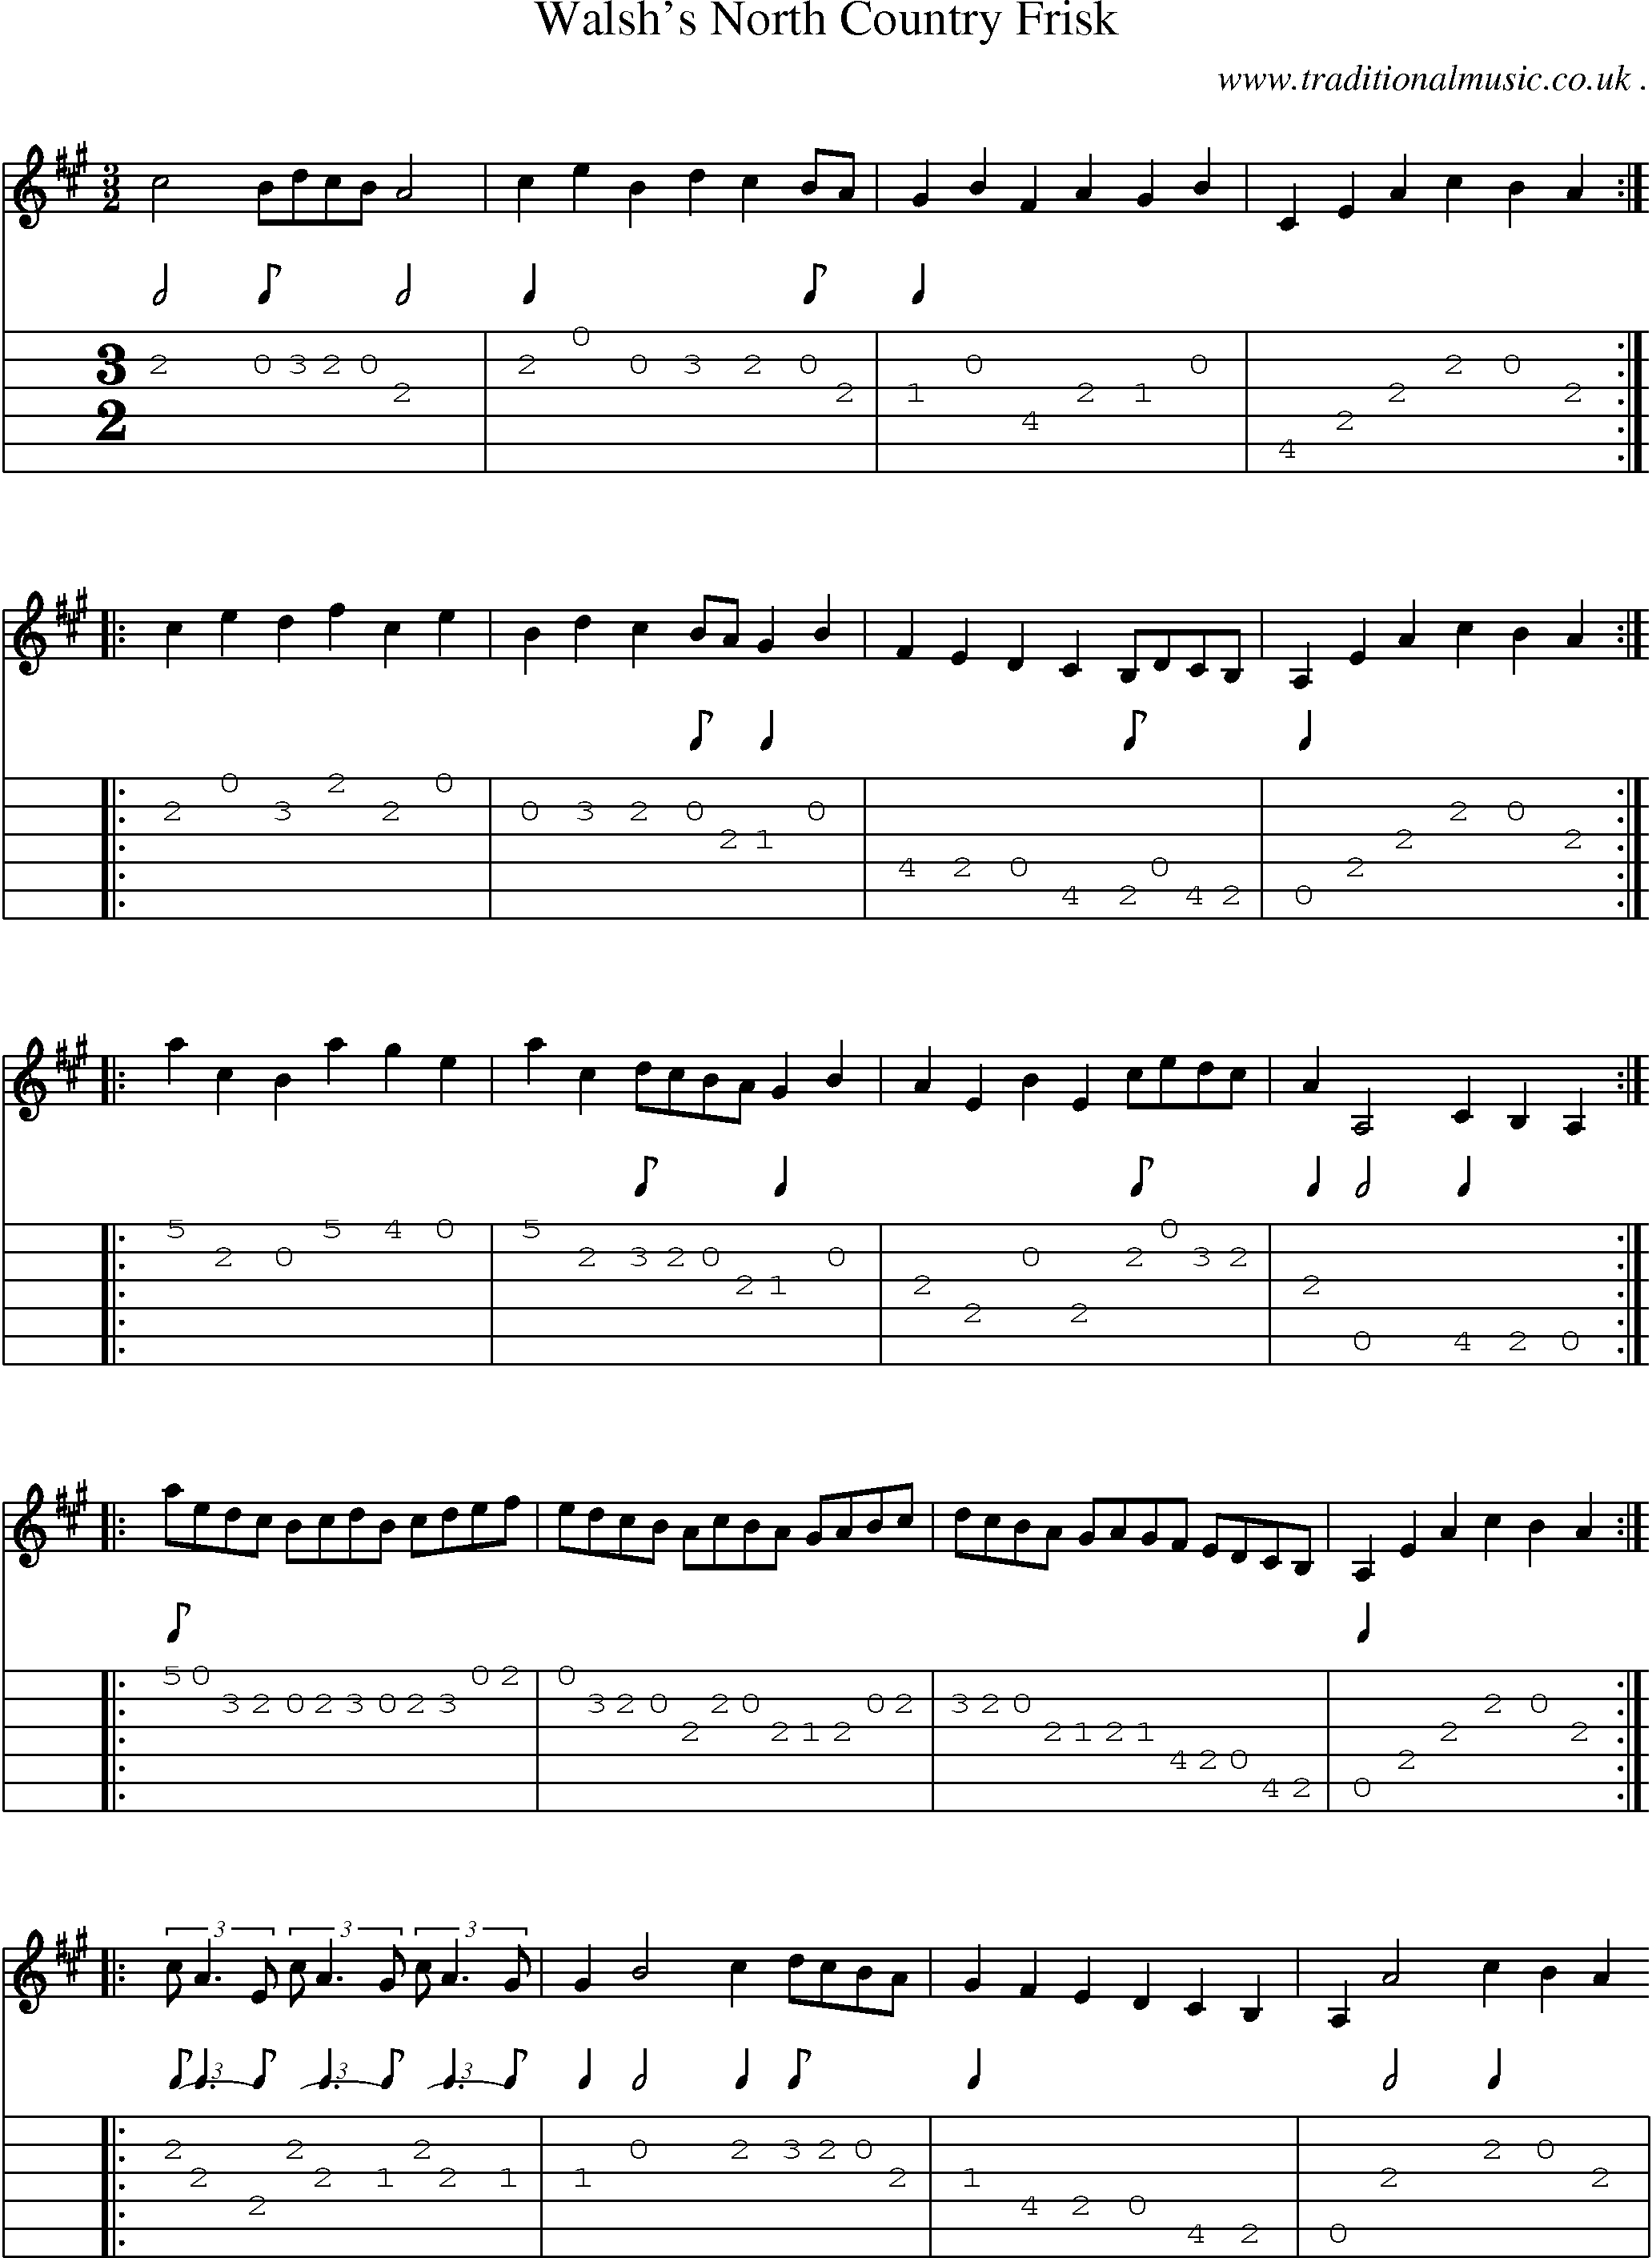 Sheet-Music and Guitar Tabs for Walshs North Country Frisk